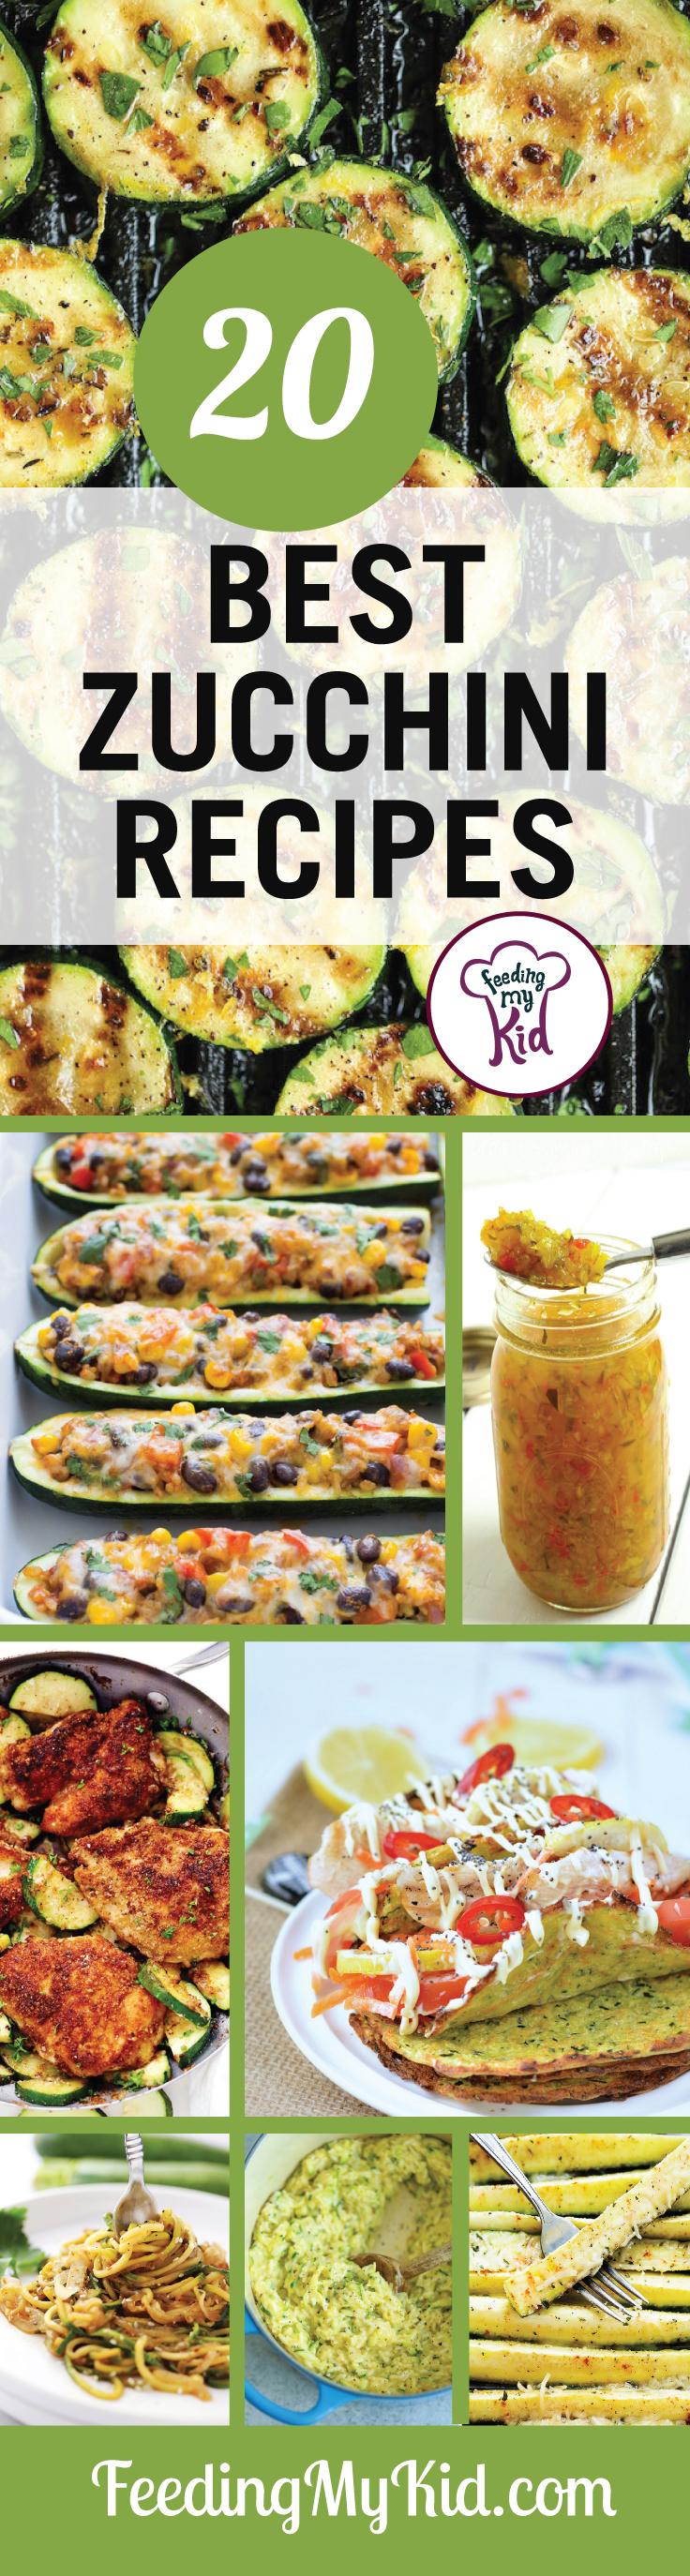 Try these amazing zucchini recipes. You and your family will love these! Zucchini are the perfect low-carb side dish for any meal.